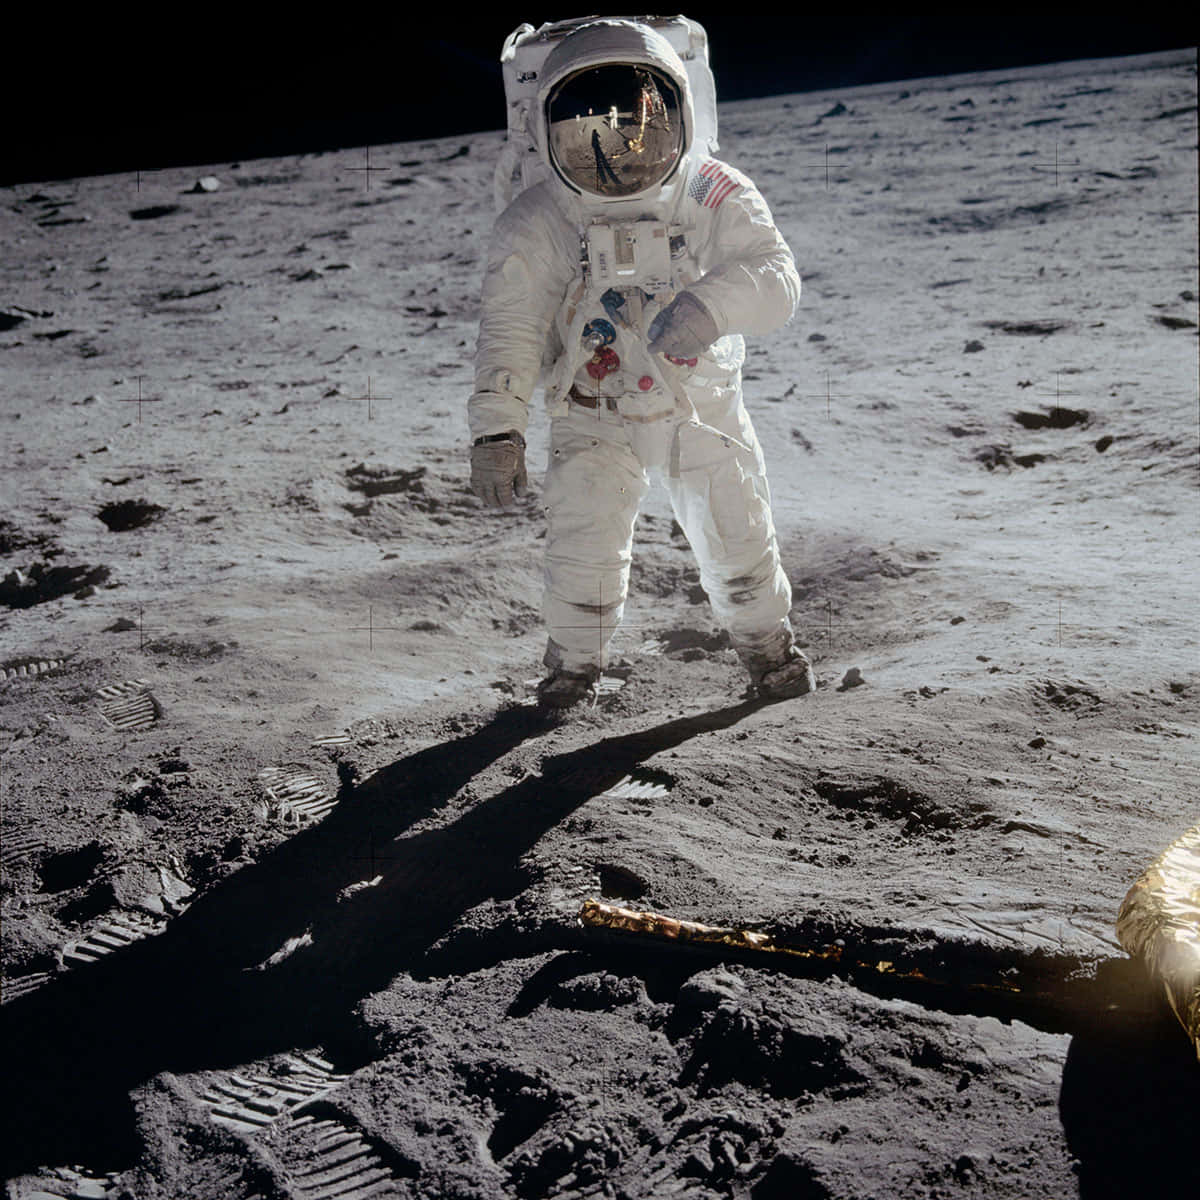 "One small step for man, one giant leap for mankind": Neil Armstrong's iconic first step on the Moon, July 20 1969